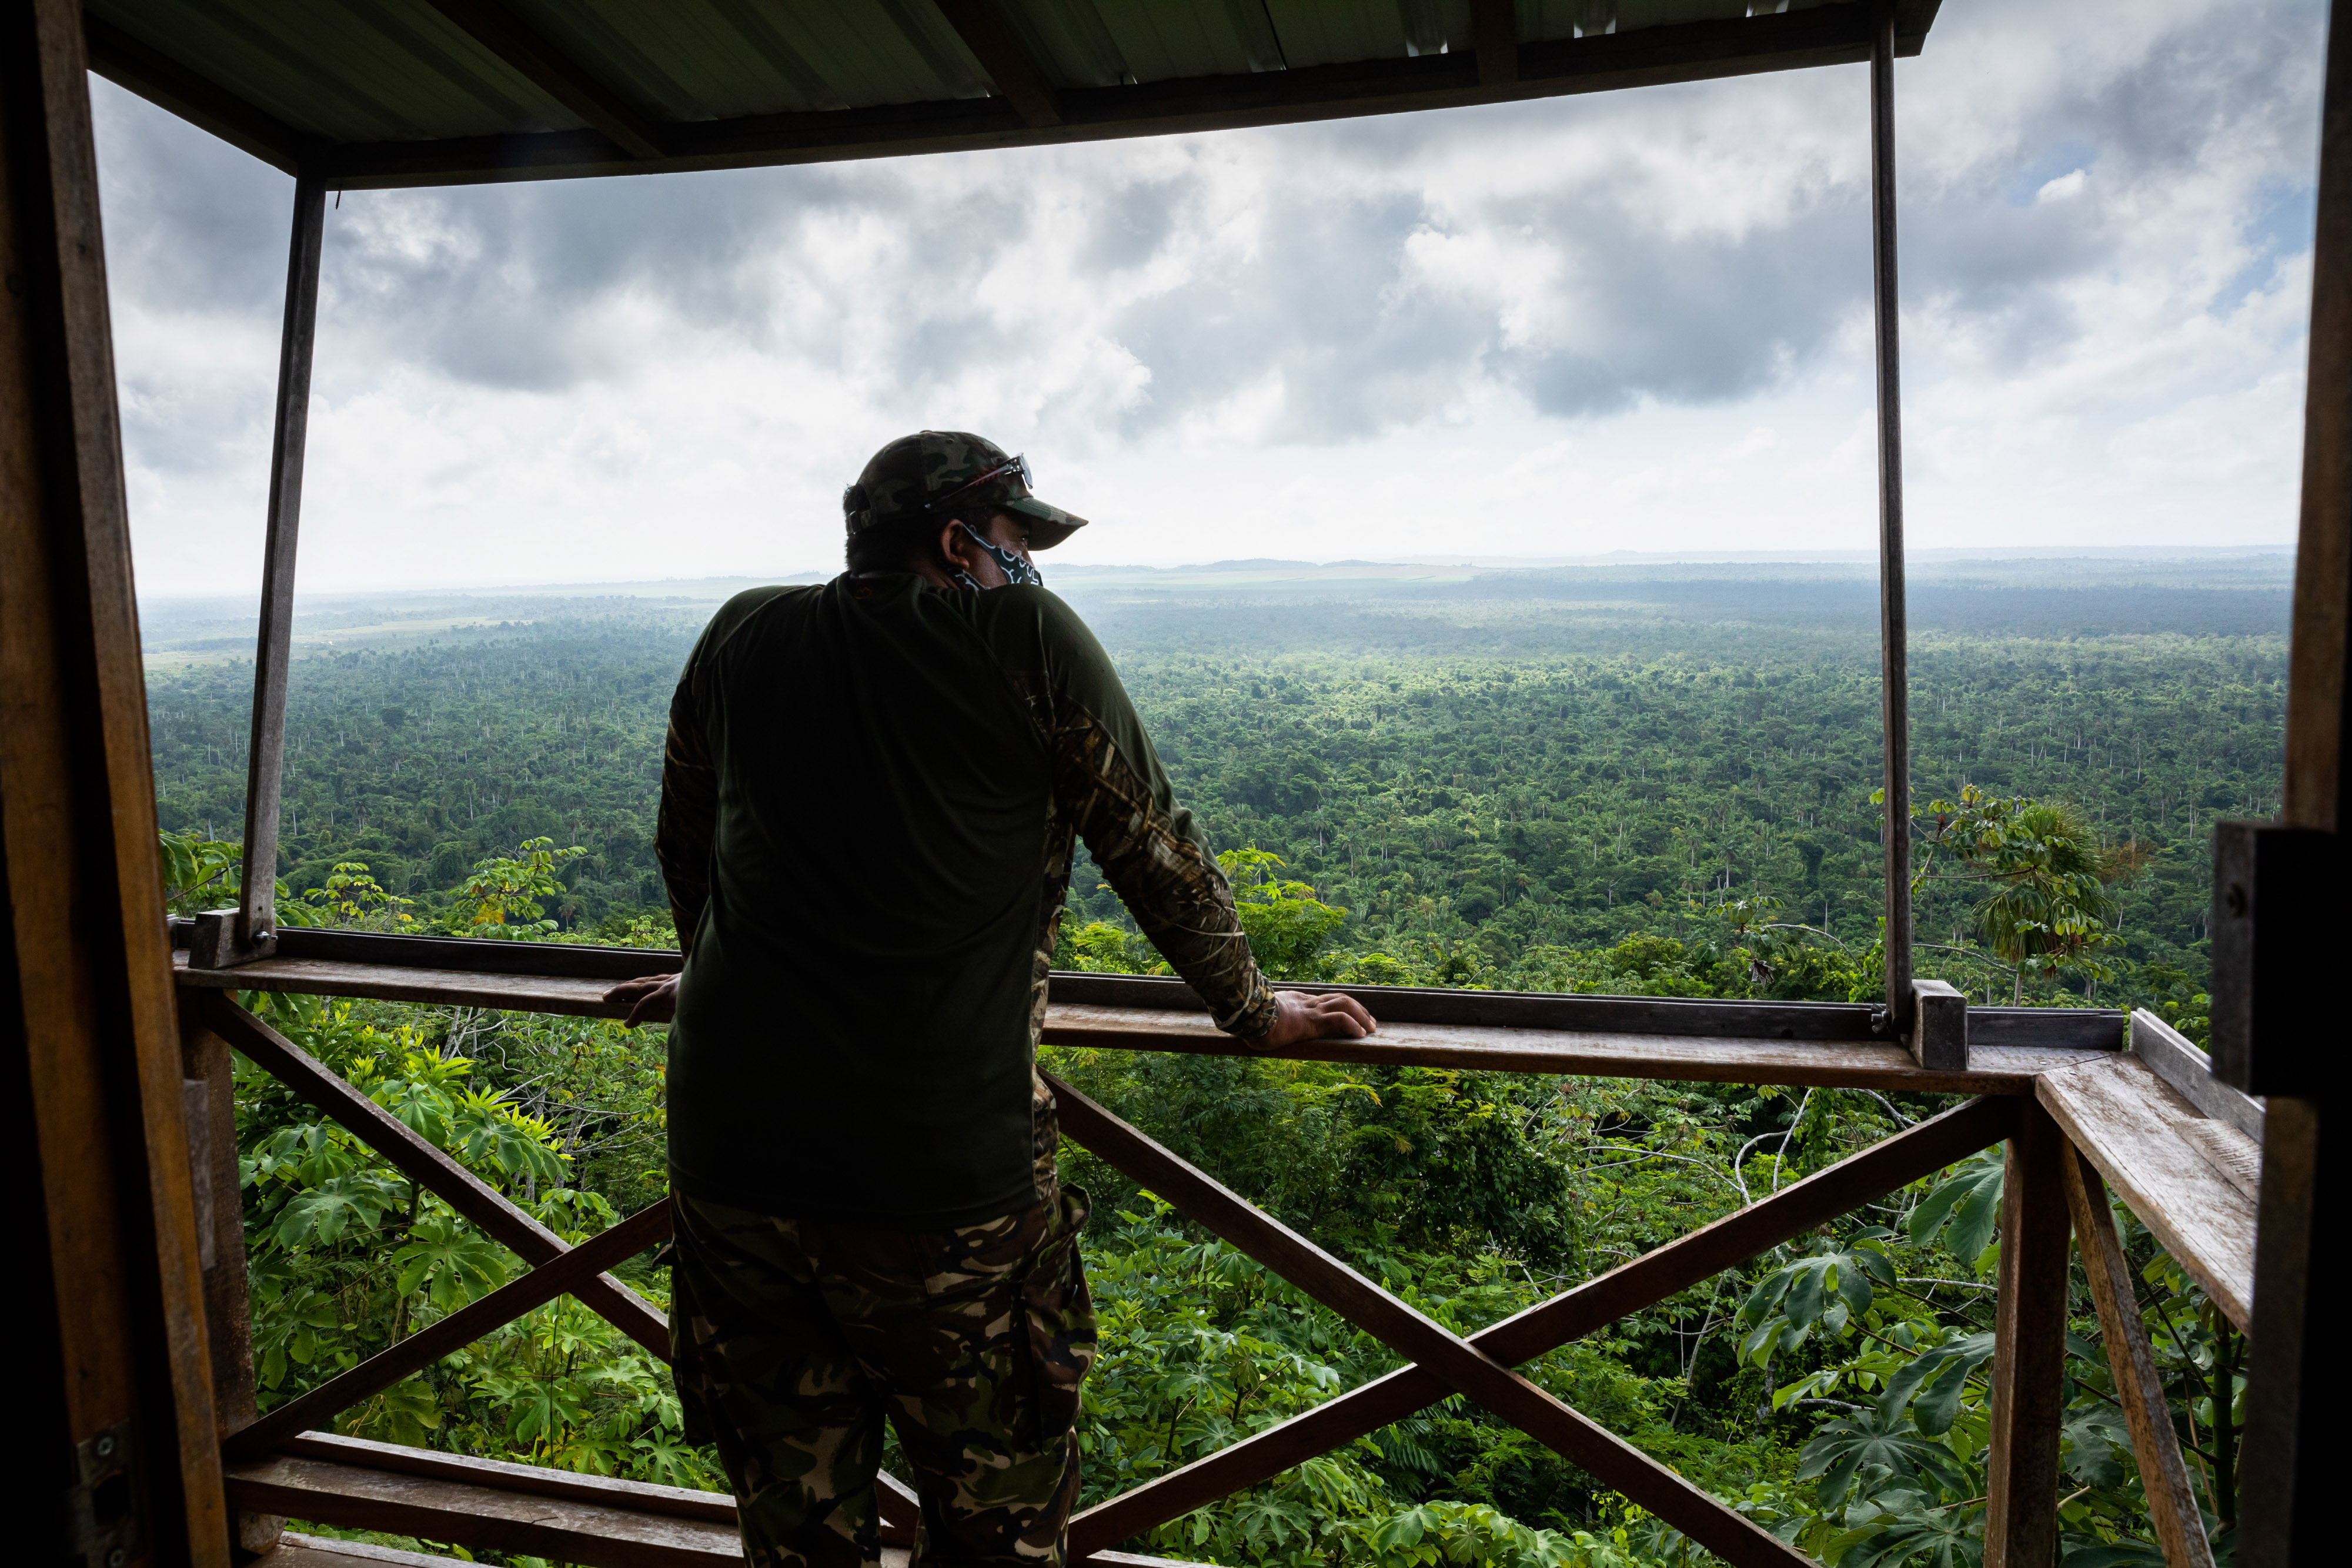 A man in a ball cap looks over a railing at a forest.